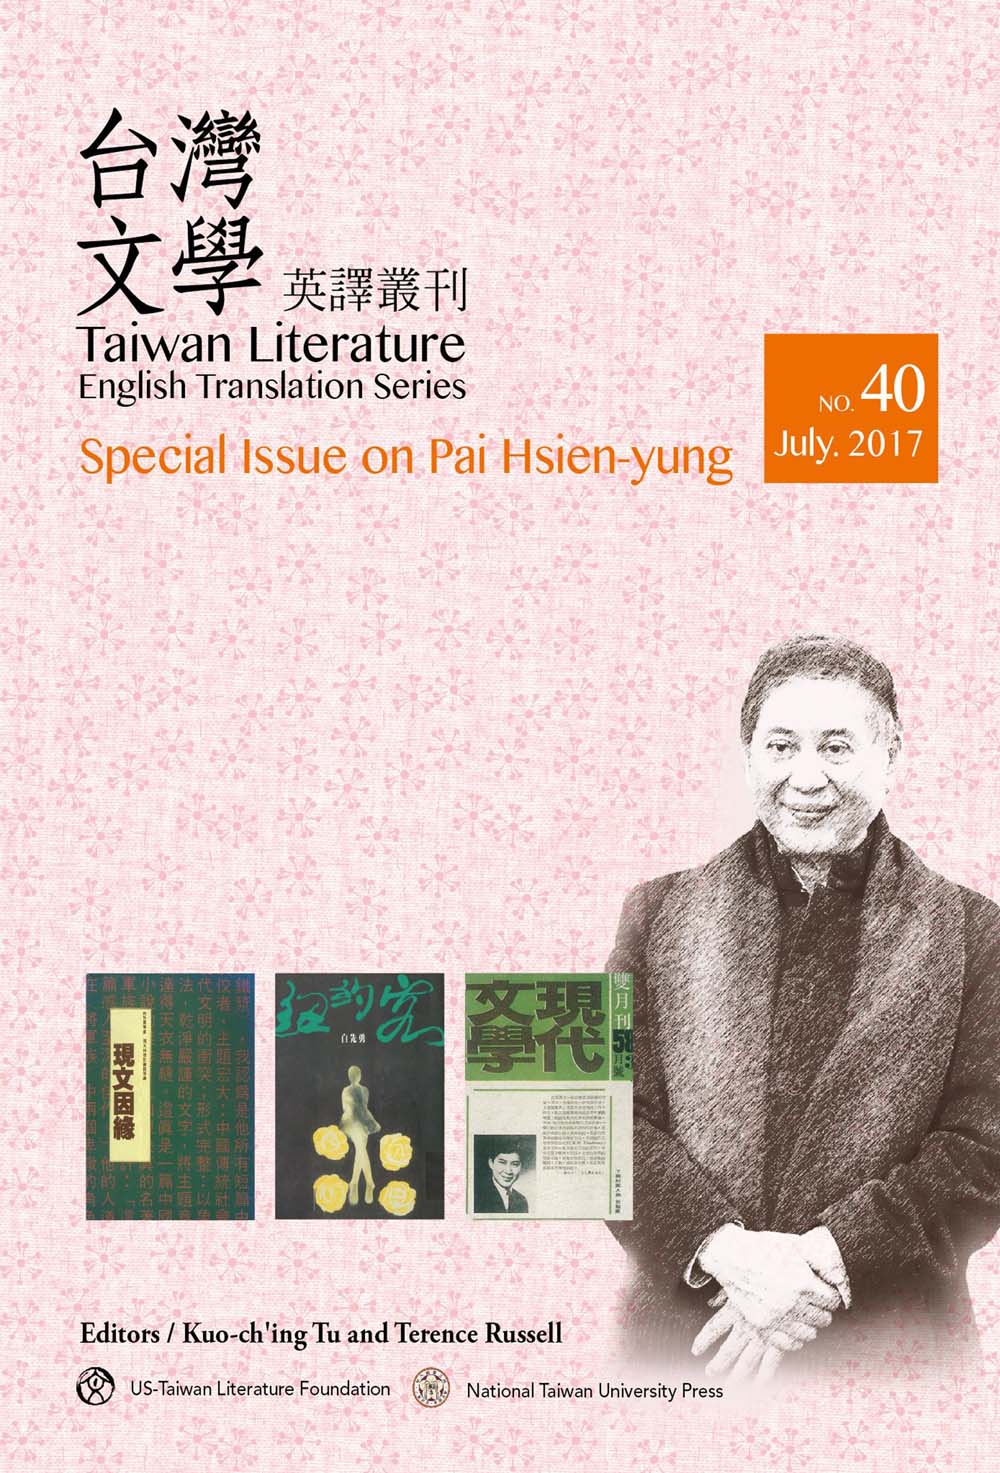 Taiwan Literature: English Translation Series, No. 40 ( Special Issue on Pai Hsien-yung)